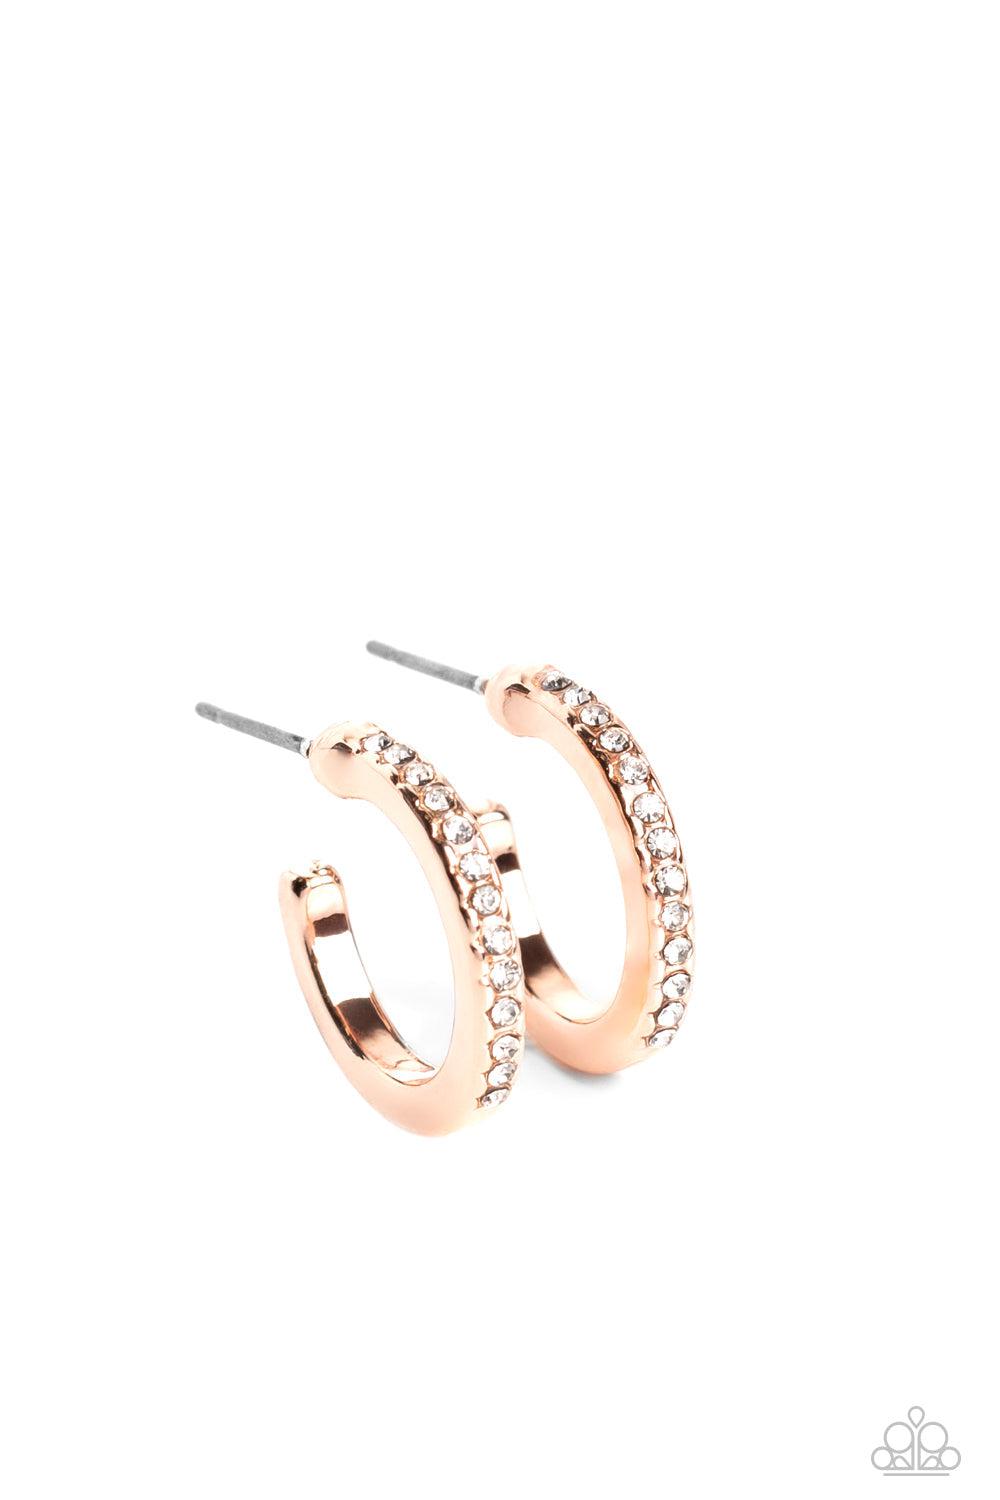 Audaciously Angelic Rose Gold Hoop Earrings - Paparazzi Accessories- lightbox - CarasShop.com - $5 Jewelry by Cara Jewels